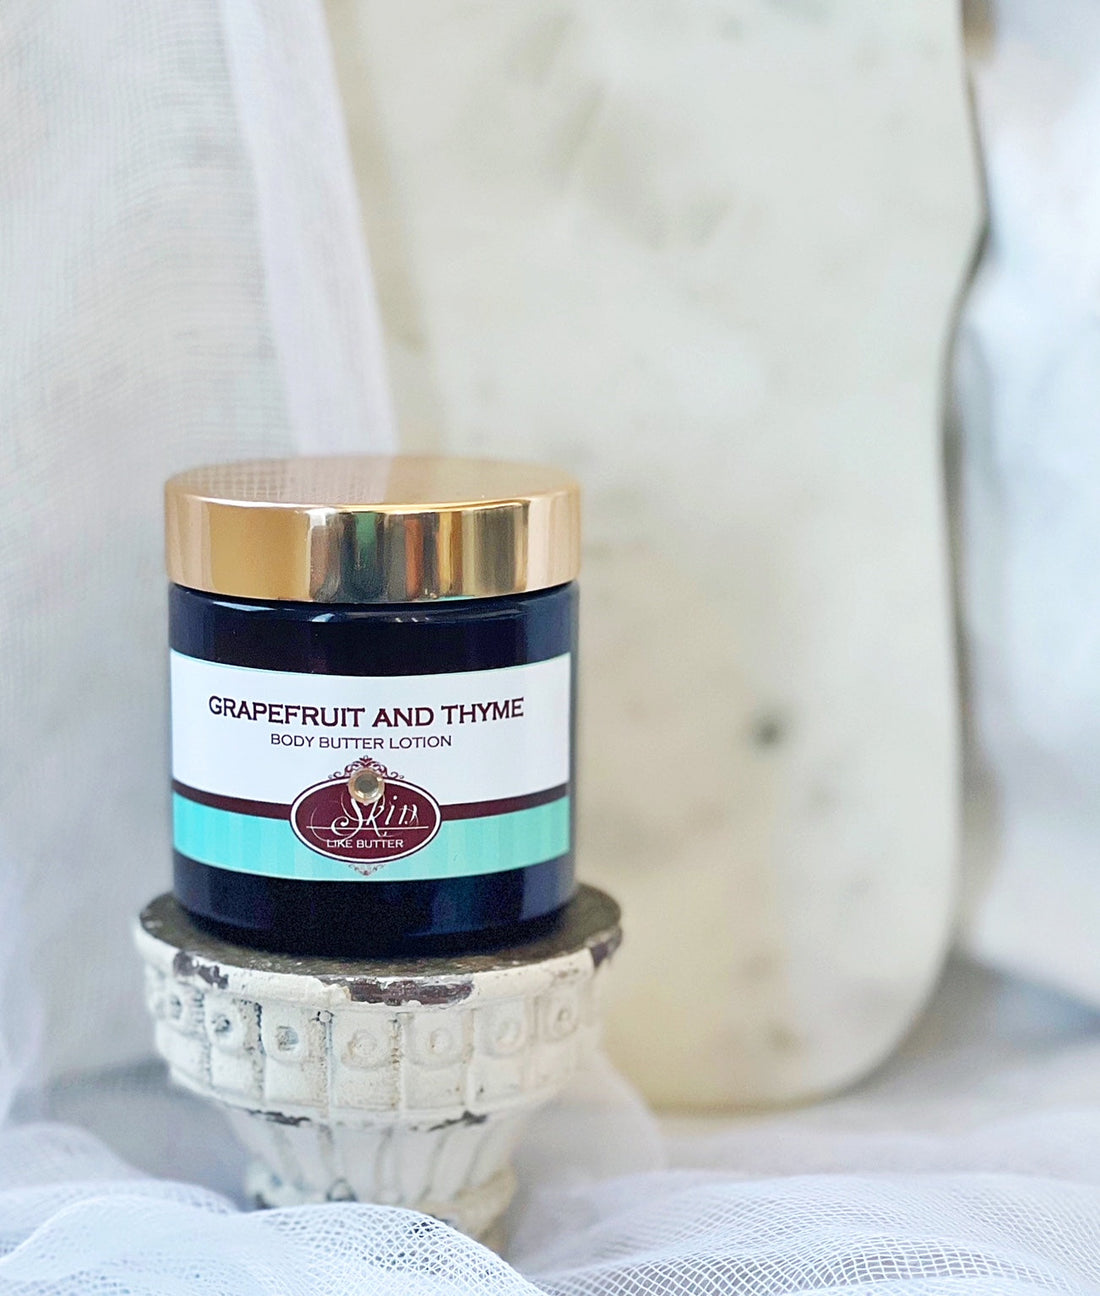 TOBACCO scented Body Butter, waterfree and non-greasy, vegan